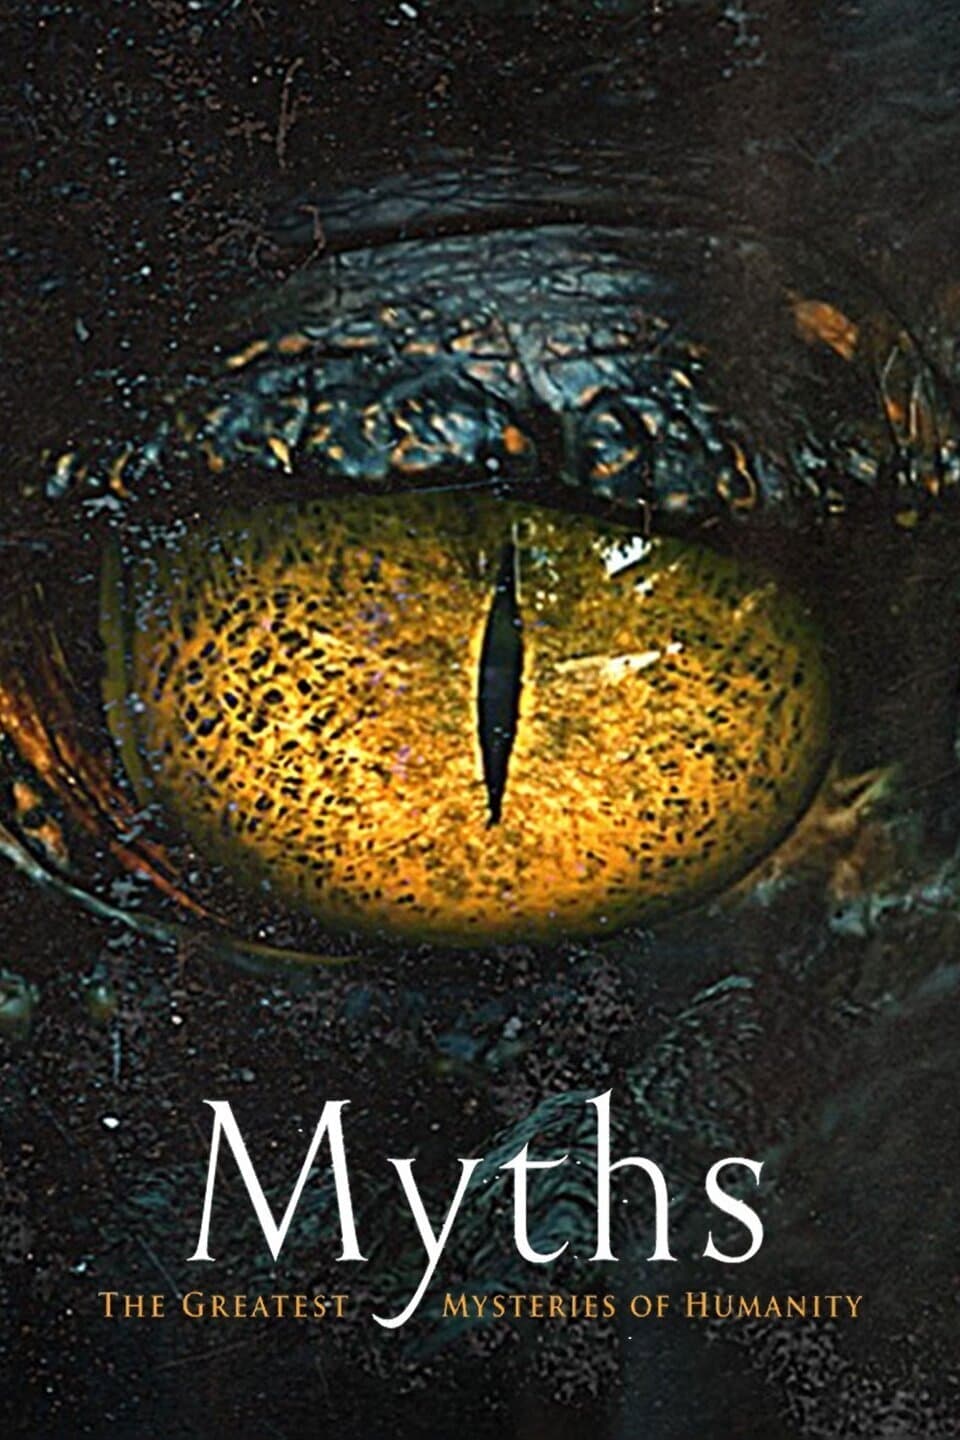 Myths: Great Mysteries of Humanity